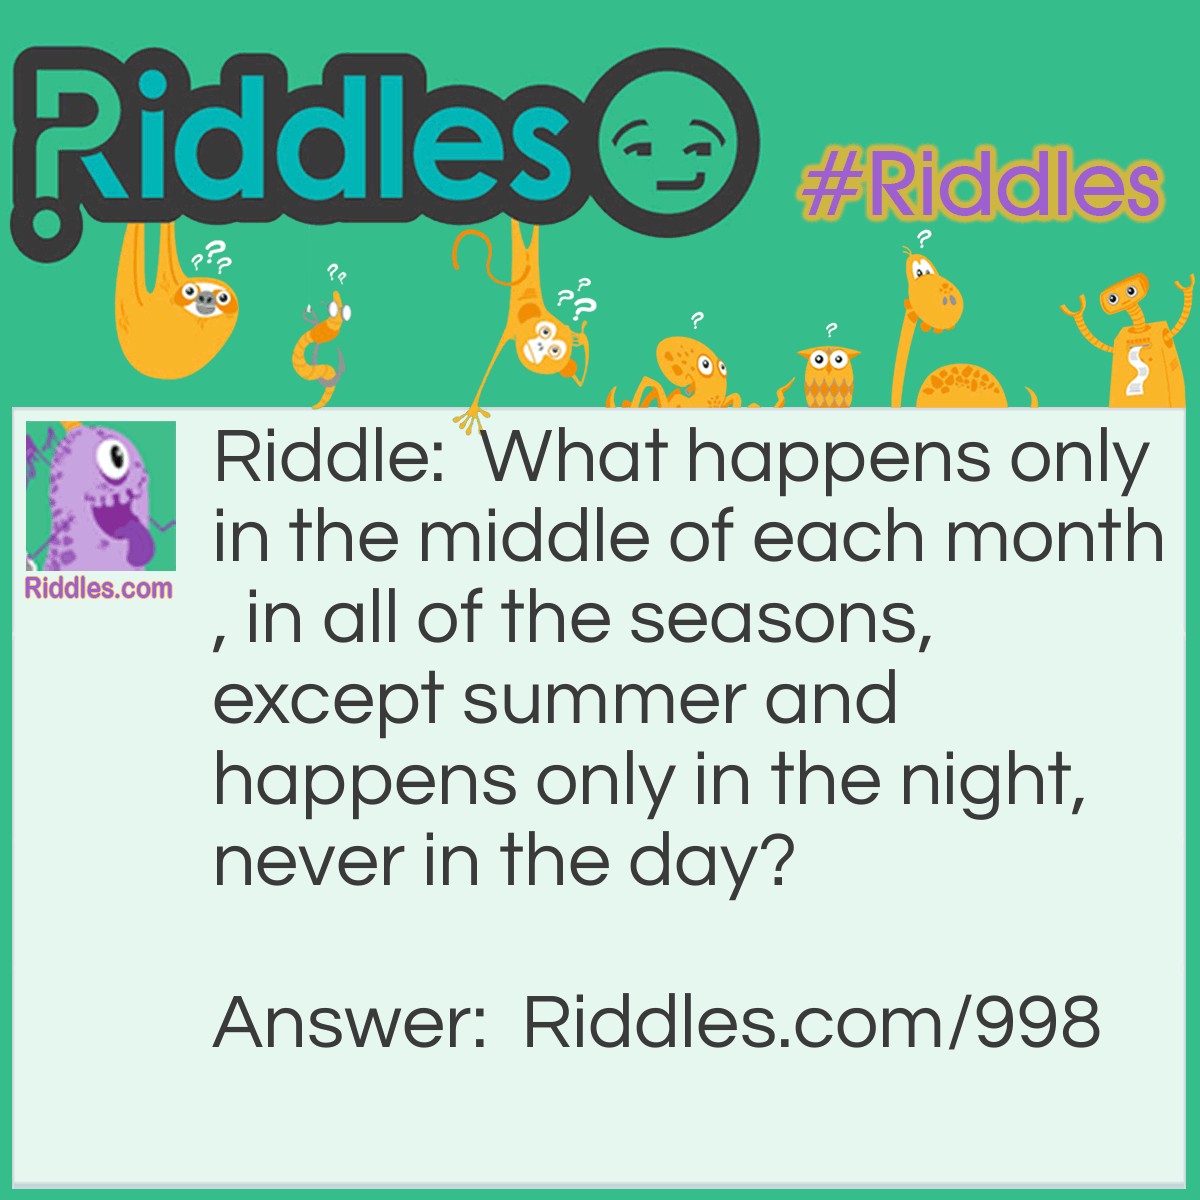 Riddle: What happens only in the middle of each month, in all of the seasons, except summer and happens only in the night, never in the day? Answer: The letter N